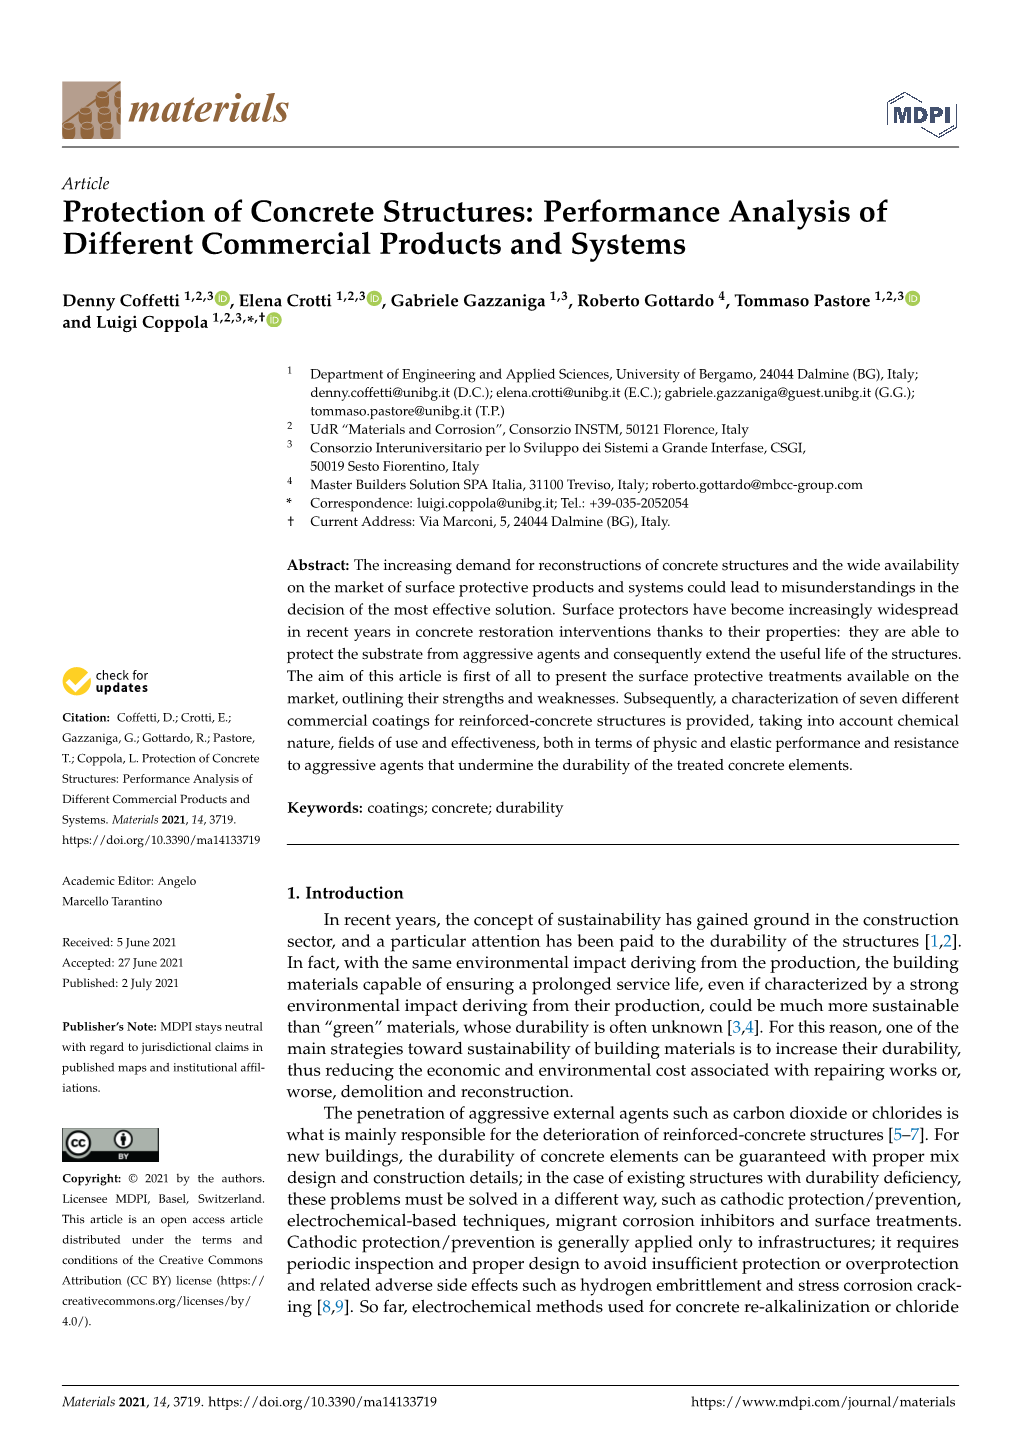 Protection of Concrete Structures: Performance Analysis of Different Commercial Products and Systems